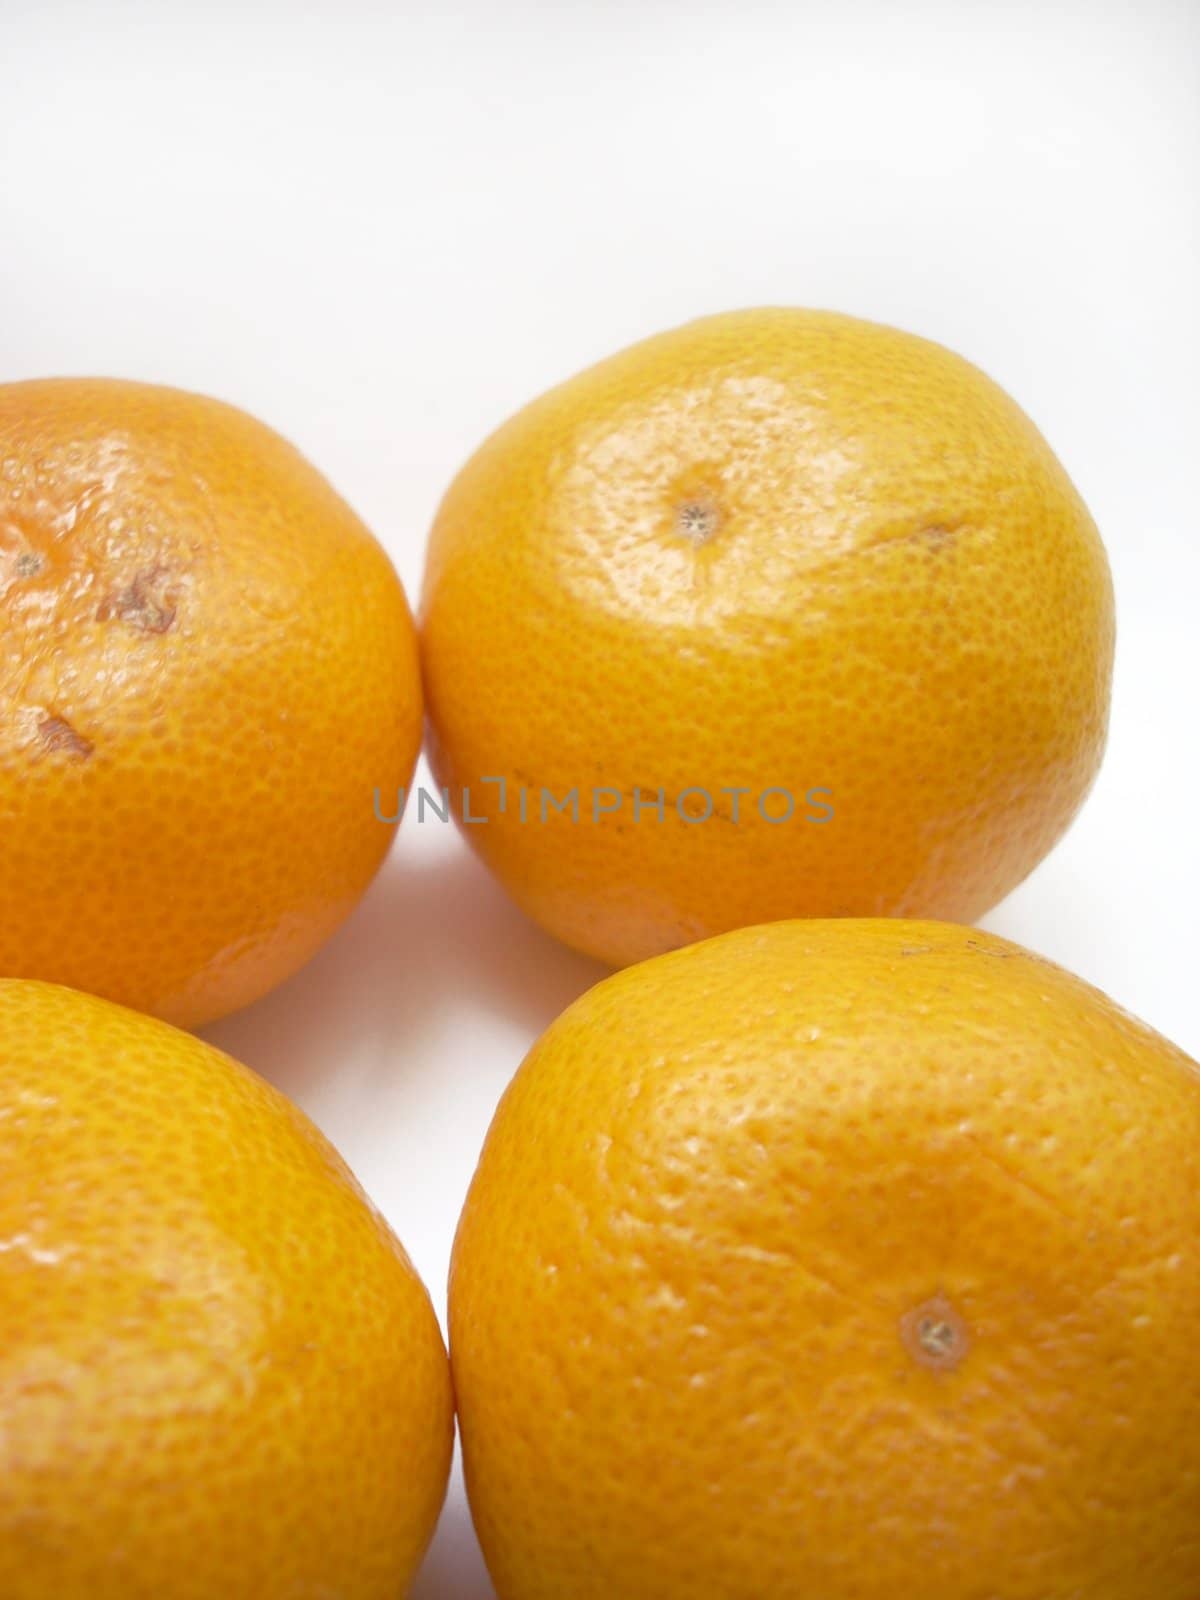 This is a photograph of some fresh and sweet fruits of mandarin